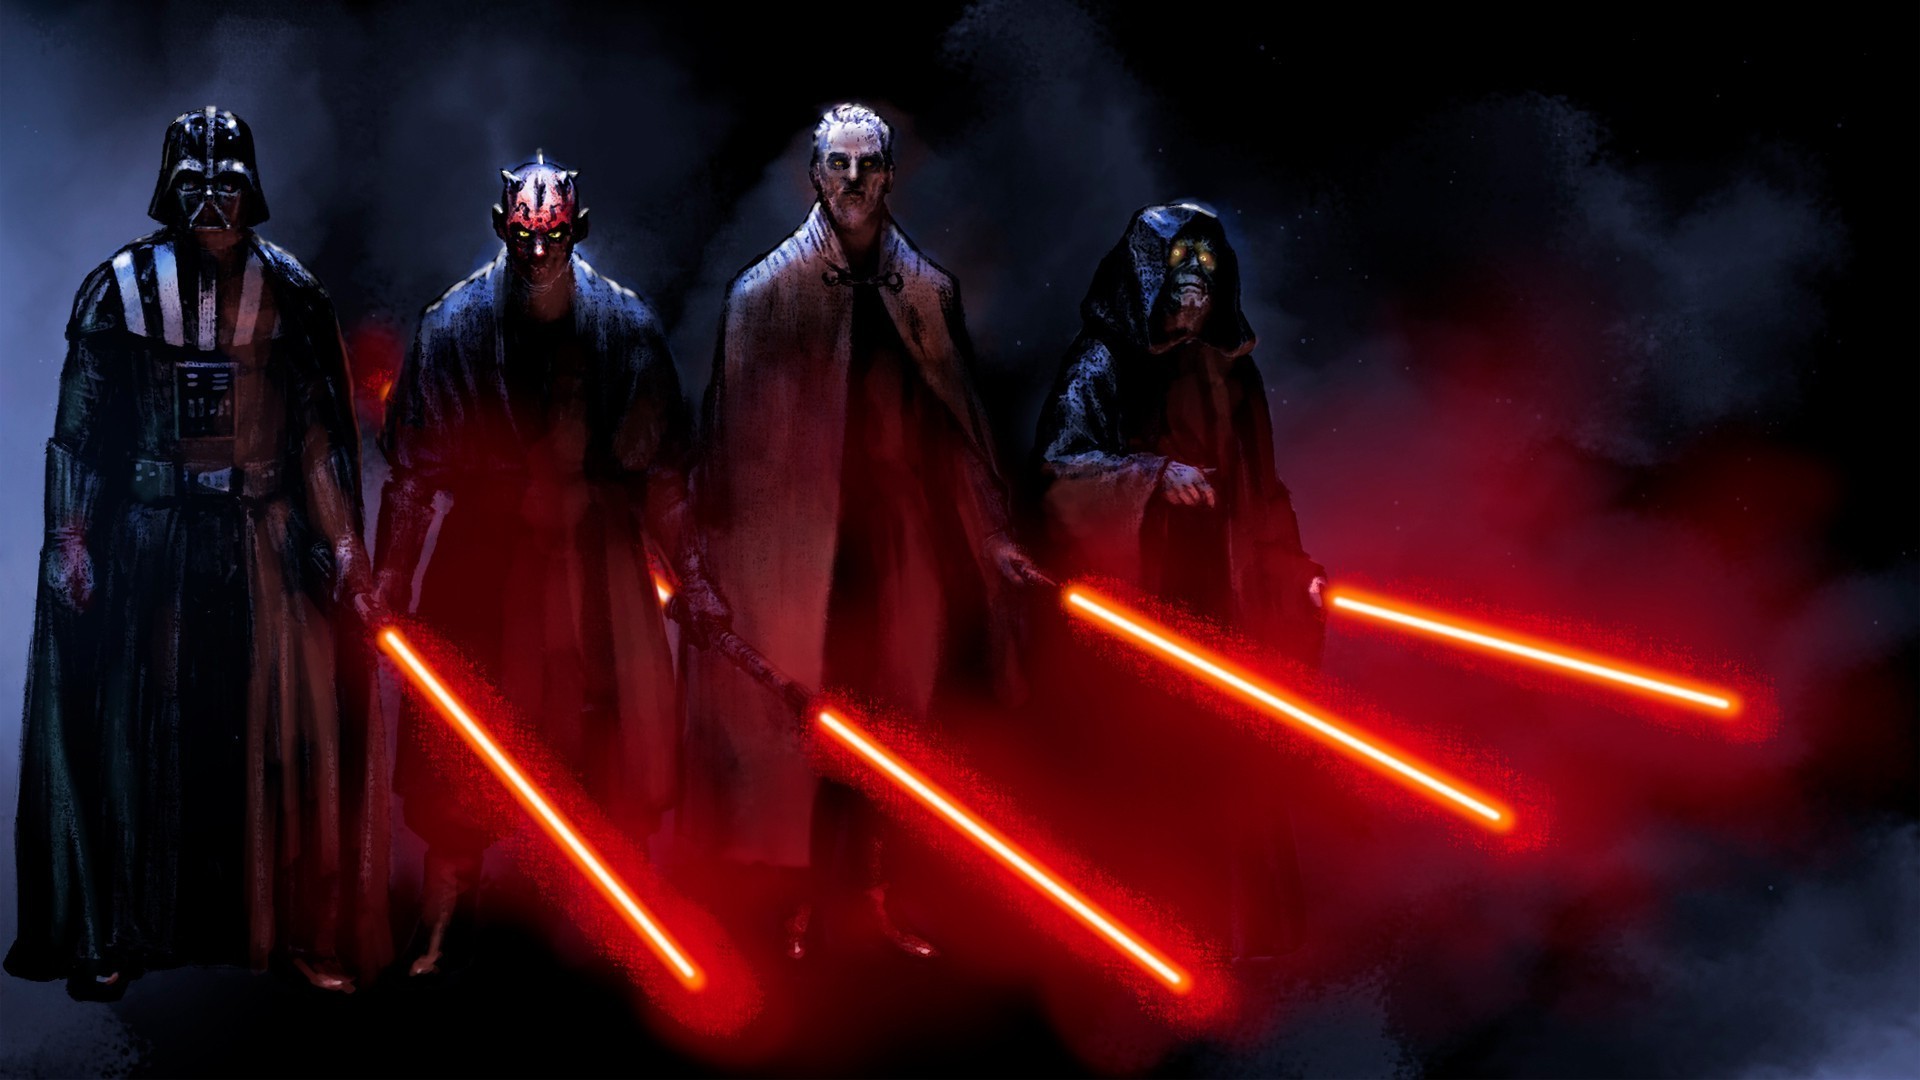 1920x1080 Star Wars images Darth Maul HD wallpaper and background photos | HD  Wallpapers | Pinterest | Darth maul wallpaper, Hd wallpaper and Wallpaper